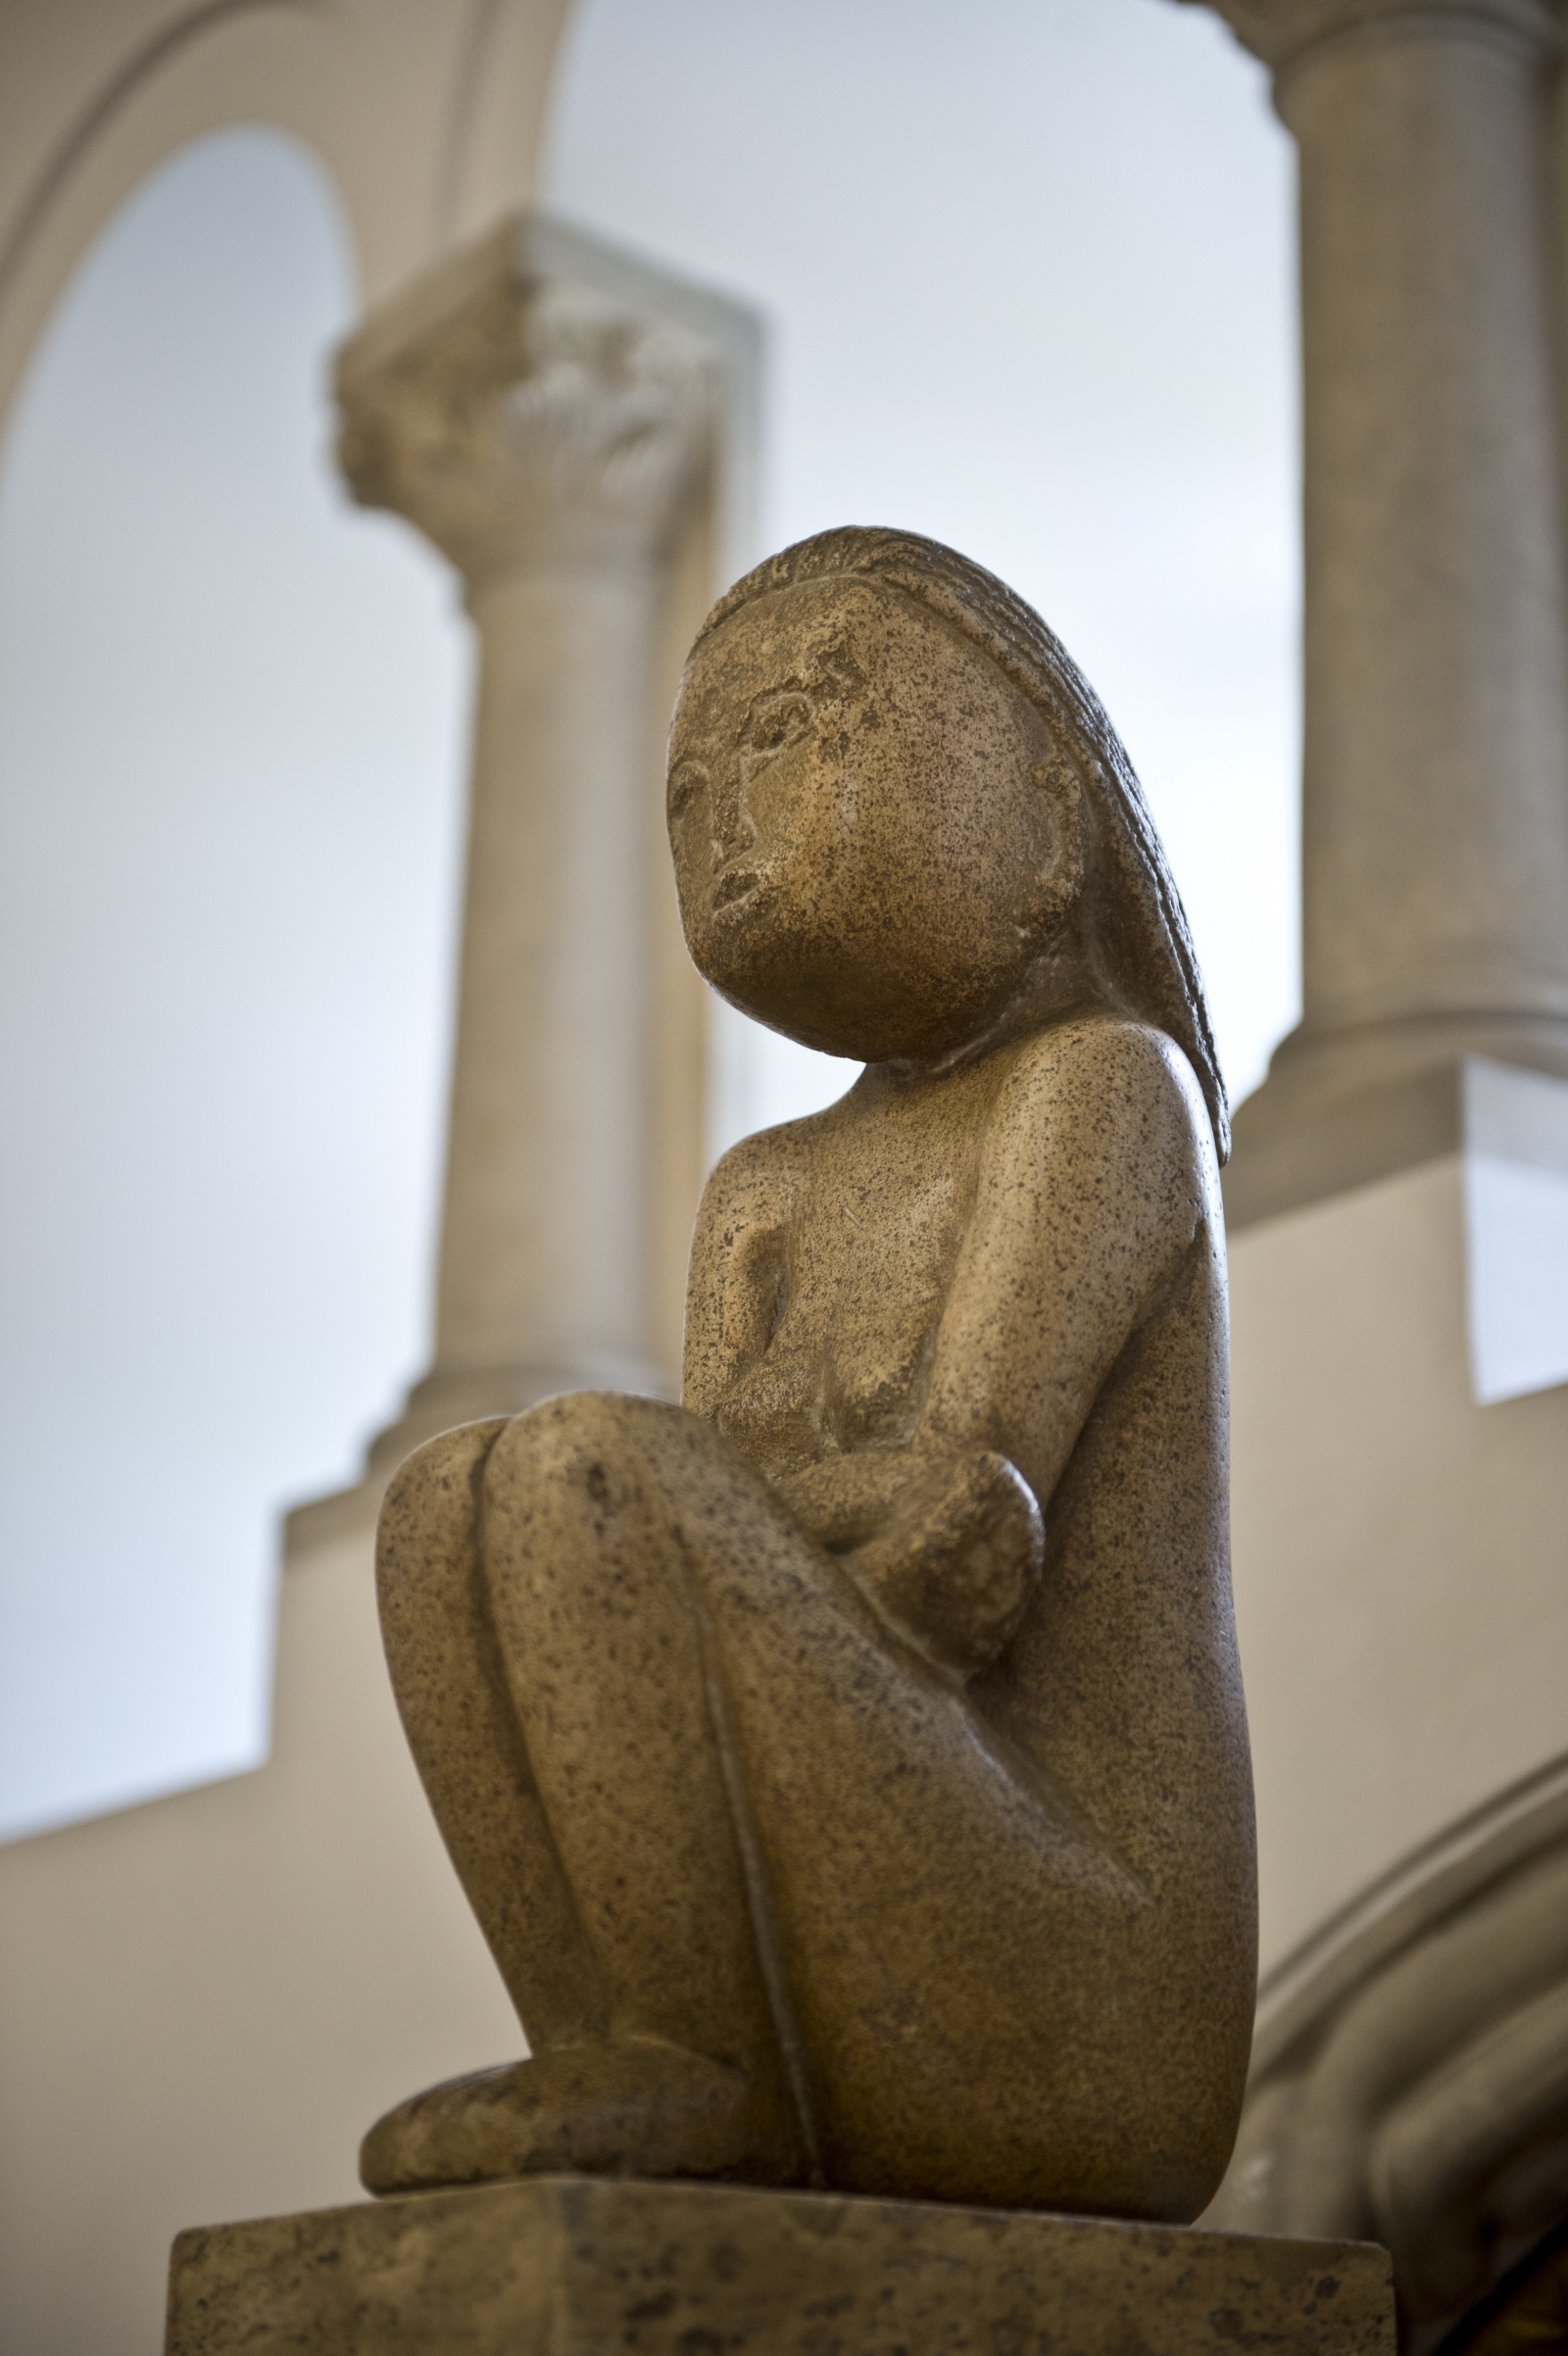 Romania asks citizens for help to raise funds to buy back Brancusi